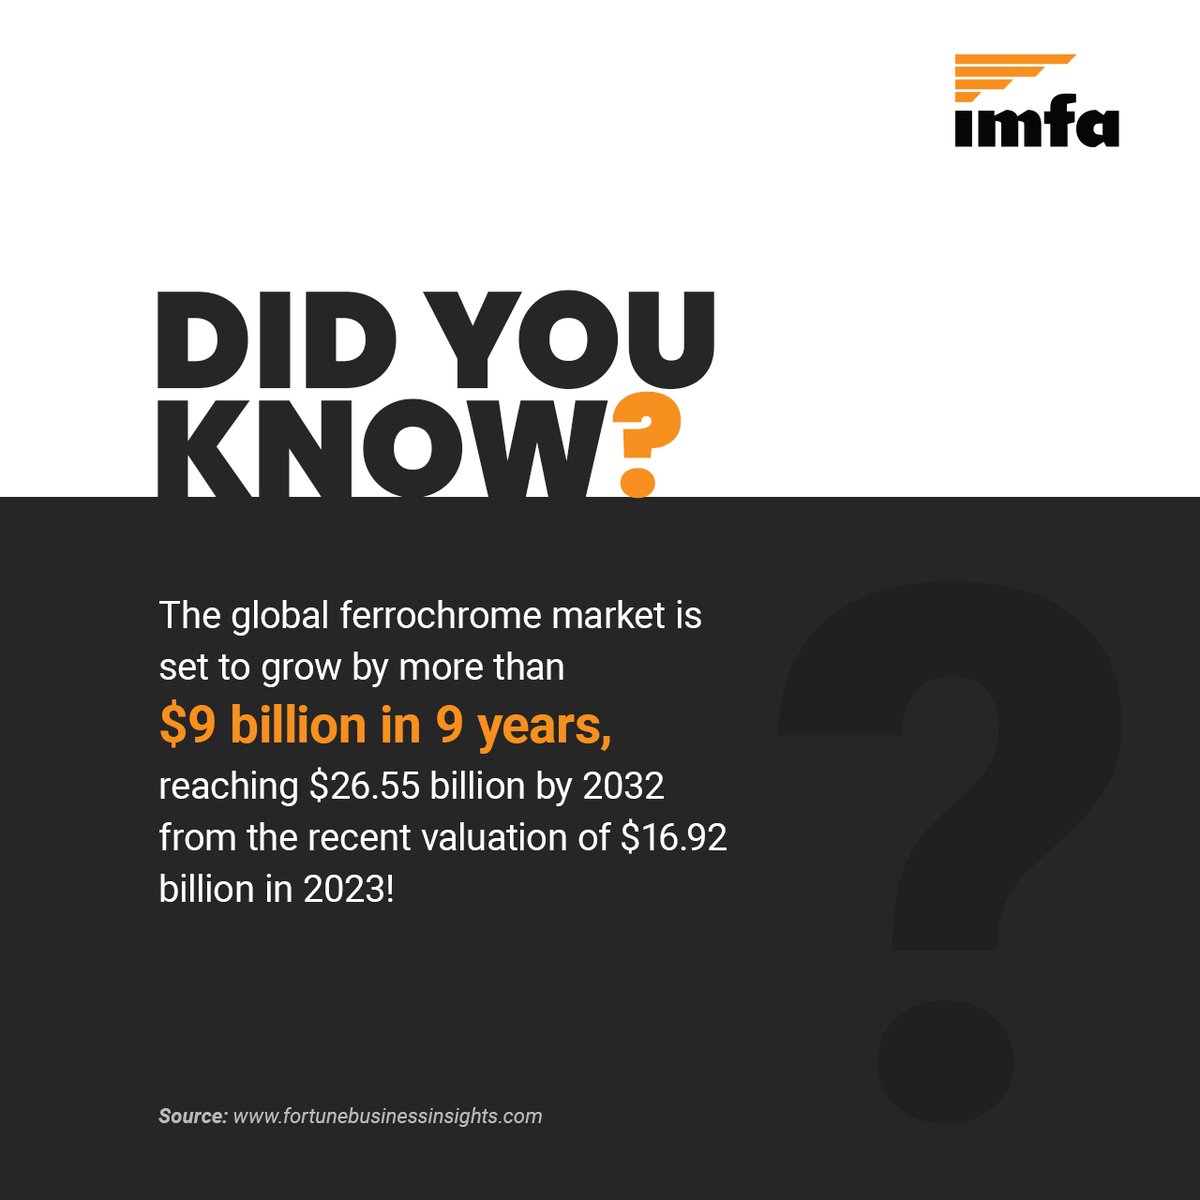 The ferrochrome industry is on the brink of a remarkable #transformation !

From innovative uses in stainless steel production to advancements in #technology, there's so much more behind these numbers.

#IMFA #Ferrochrome #stainlesssteel #BusinessNews